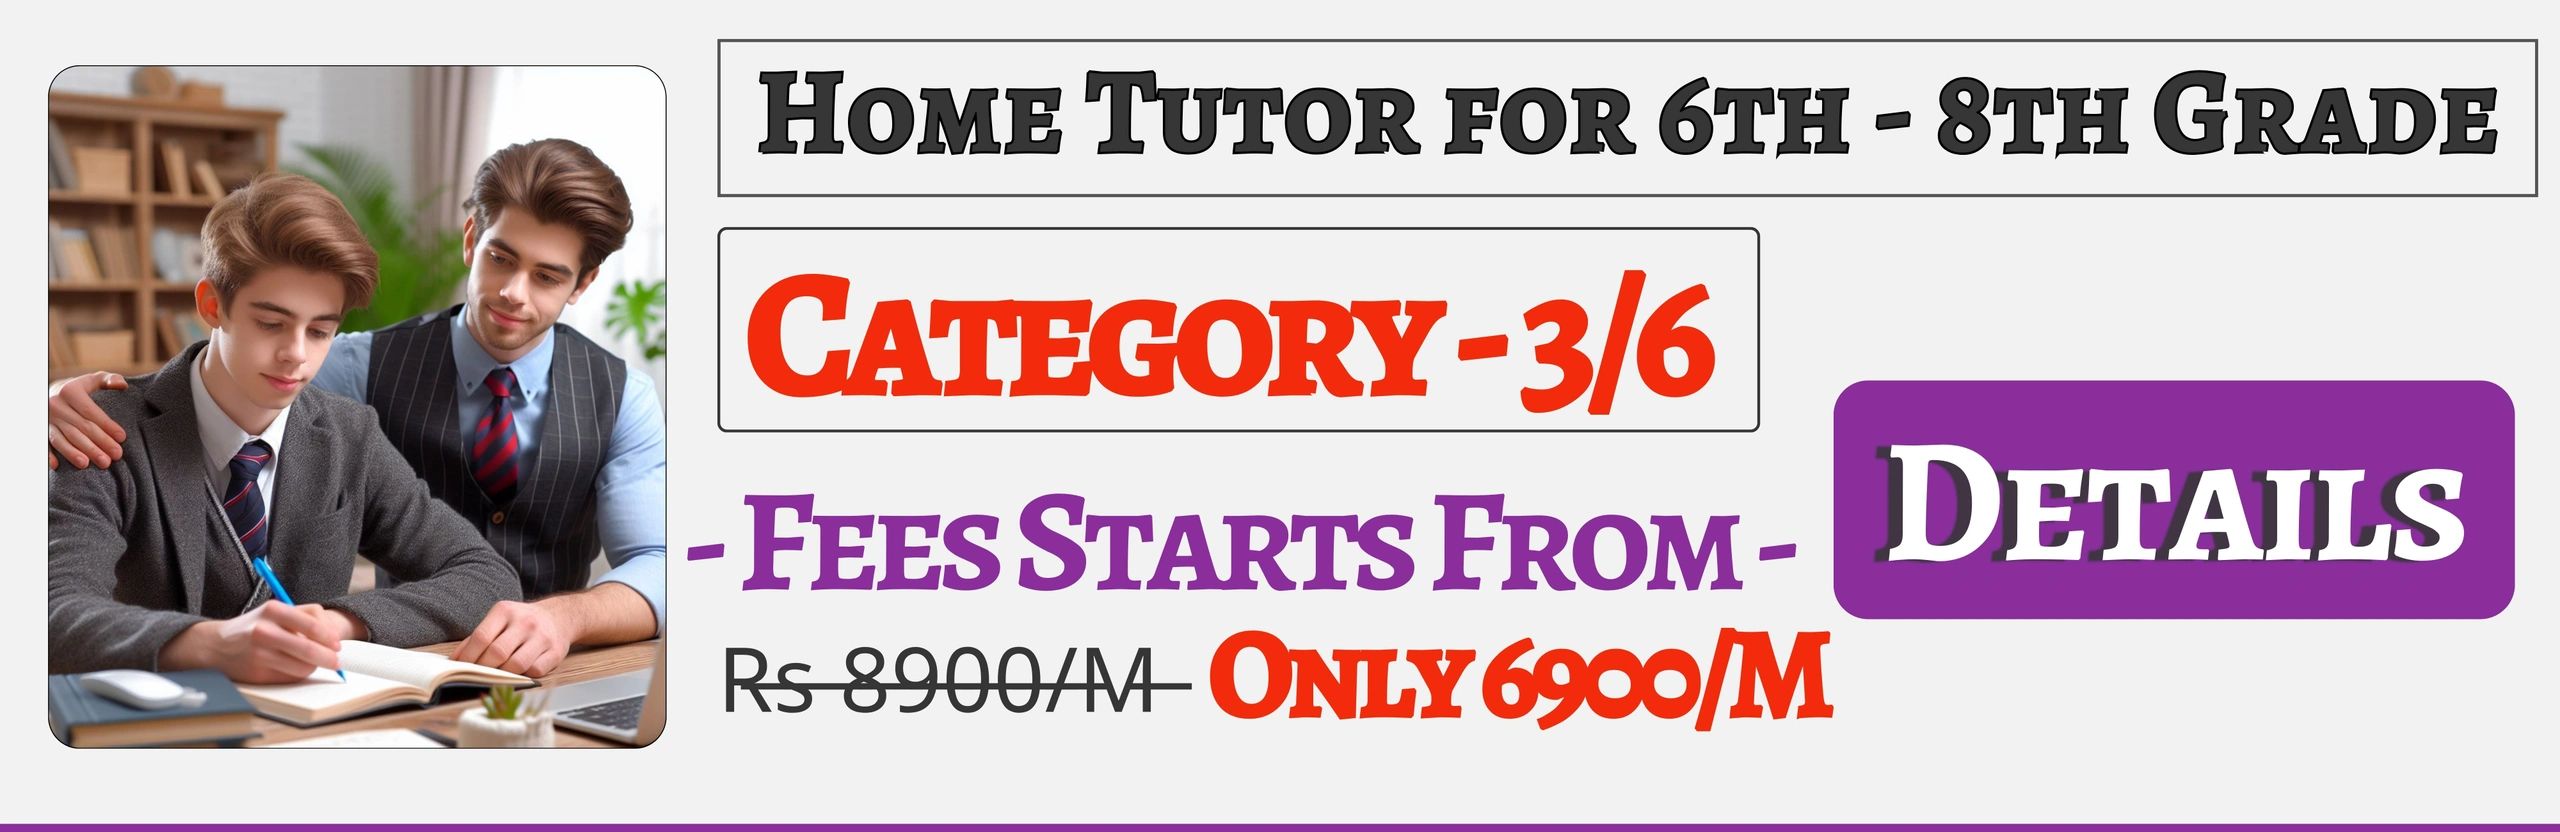 Book Best Home Tuition Tutors For 6th 7th & 8th In Jaipur Fees Only 6900/M